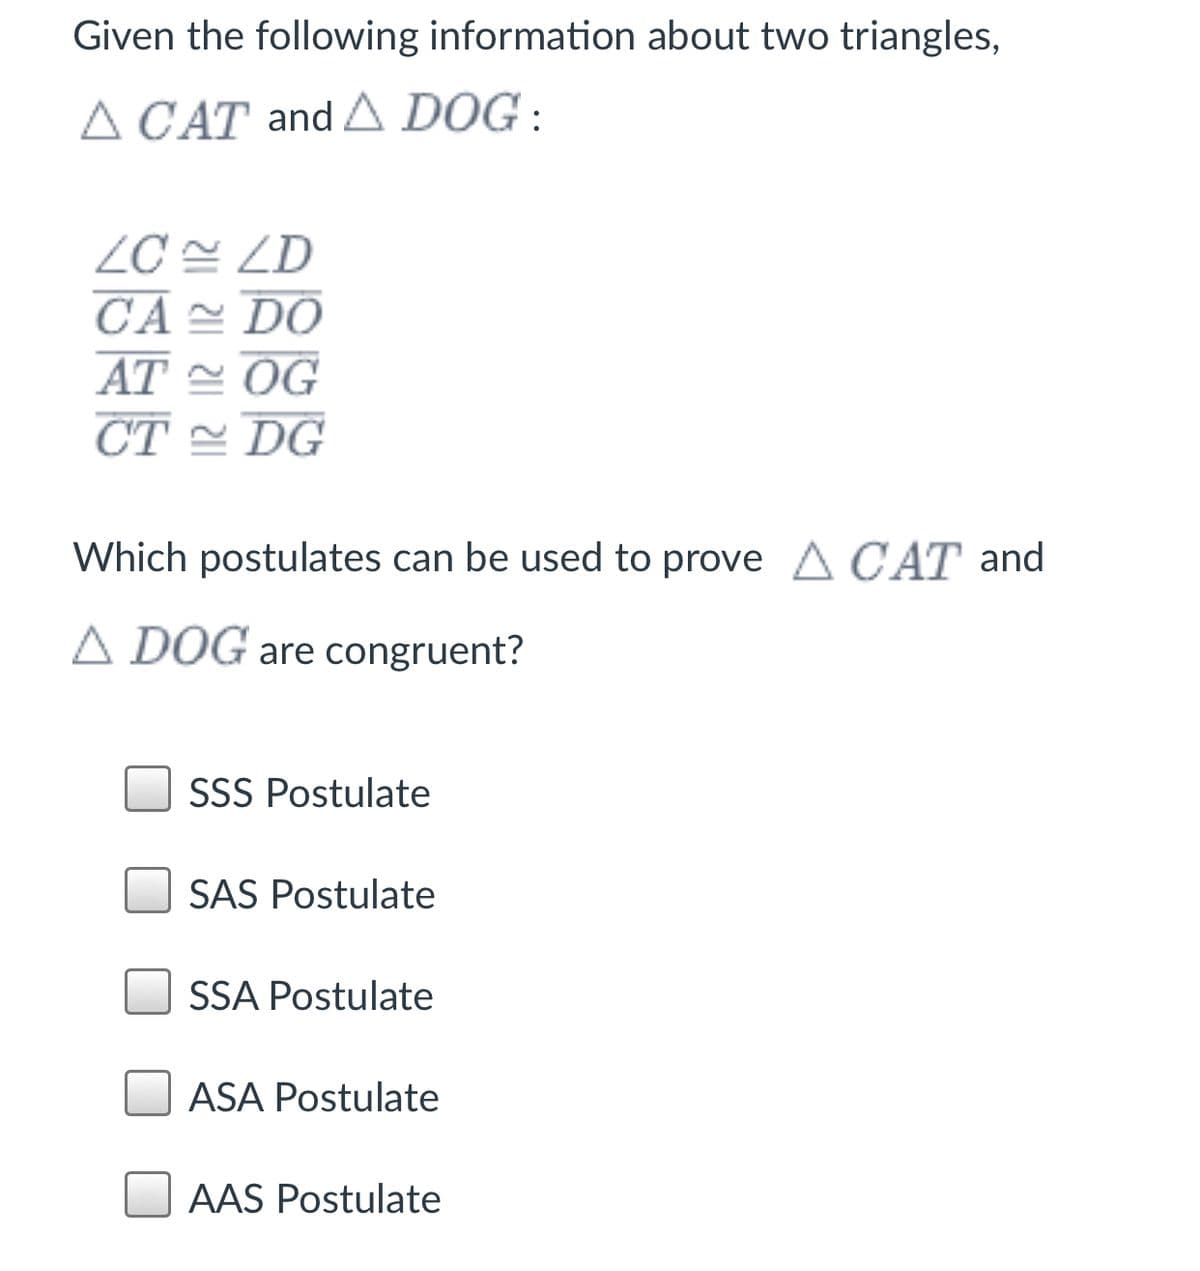 Given the following information about two triangles,
A CAT and A DOG :
ZC 쓴 ZD
CA DO
AT 스 OG
CT = DG
Which postulates can be used to prove A CAT and
A DOG are congruent?
SSS Postulate
SAS Postulate
SSA Postulate
ASA Postulate
AAS Postulate
